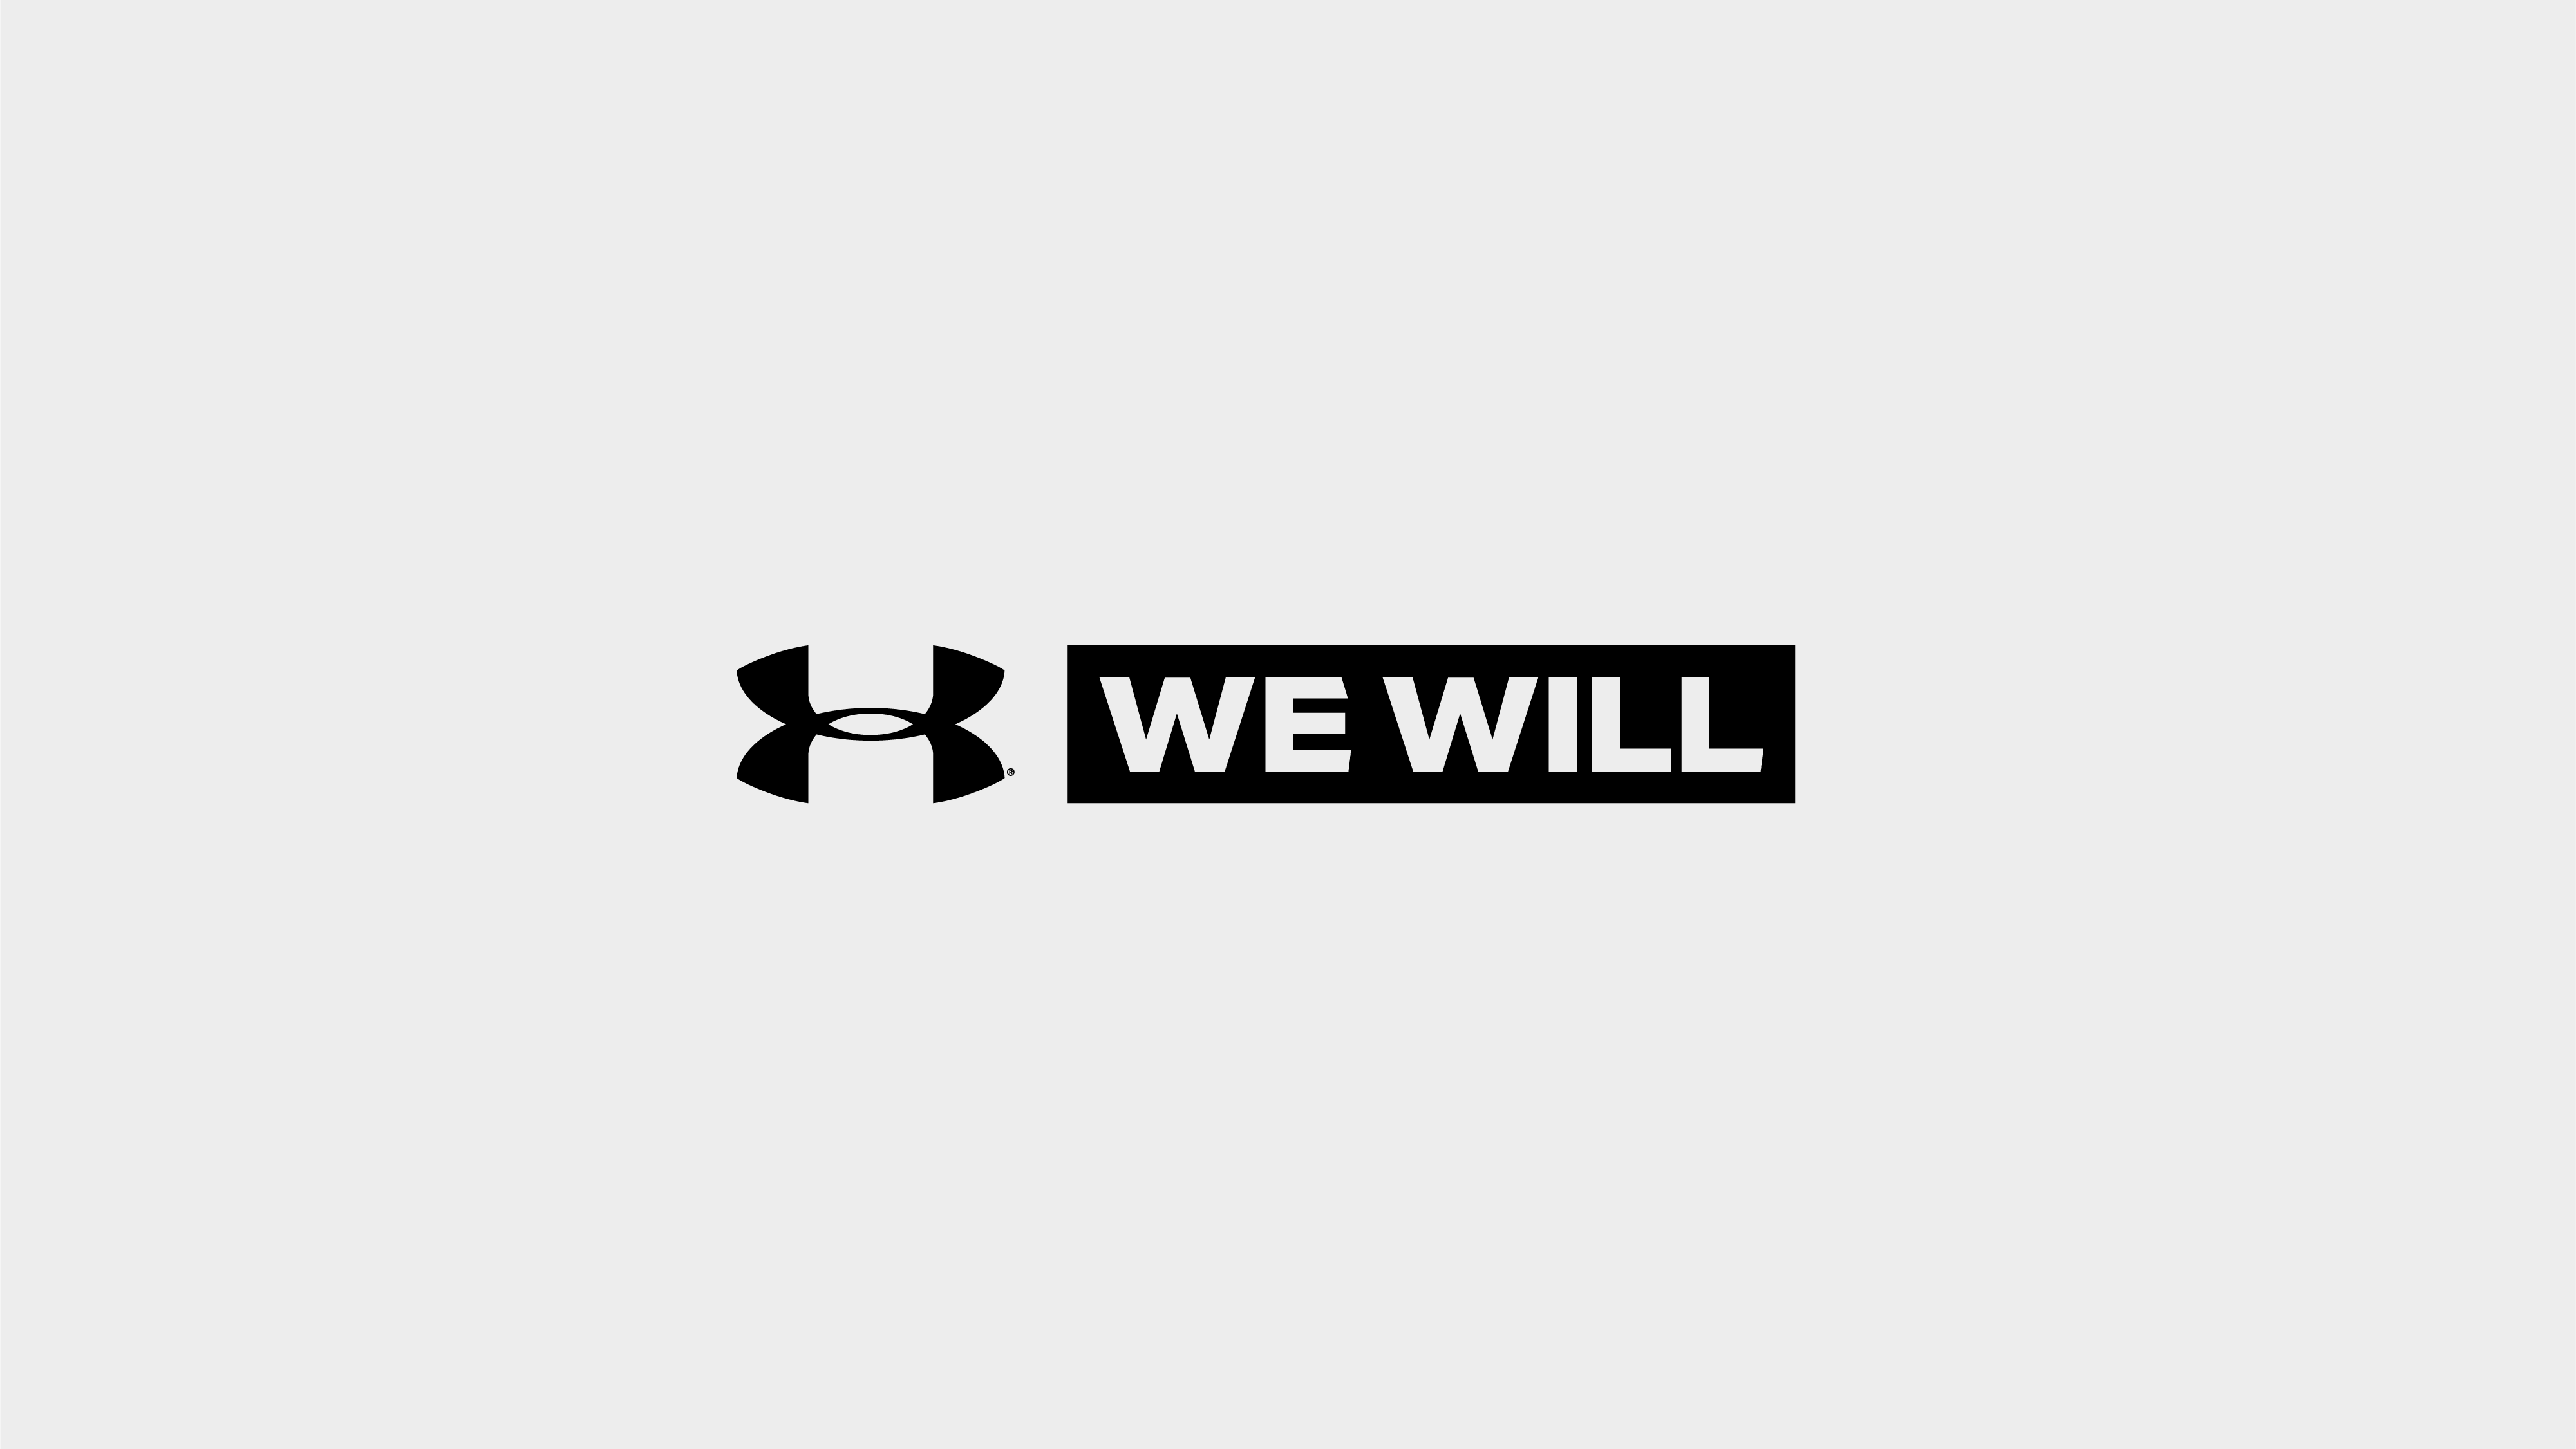 we will under armour